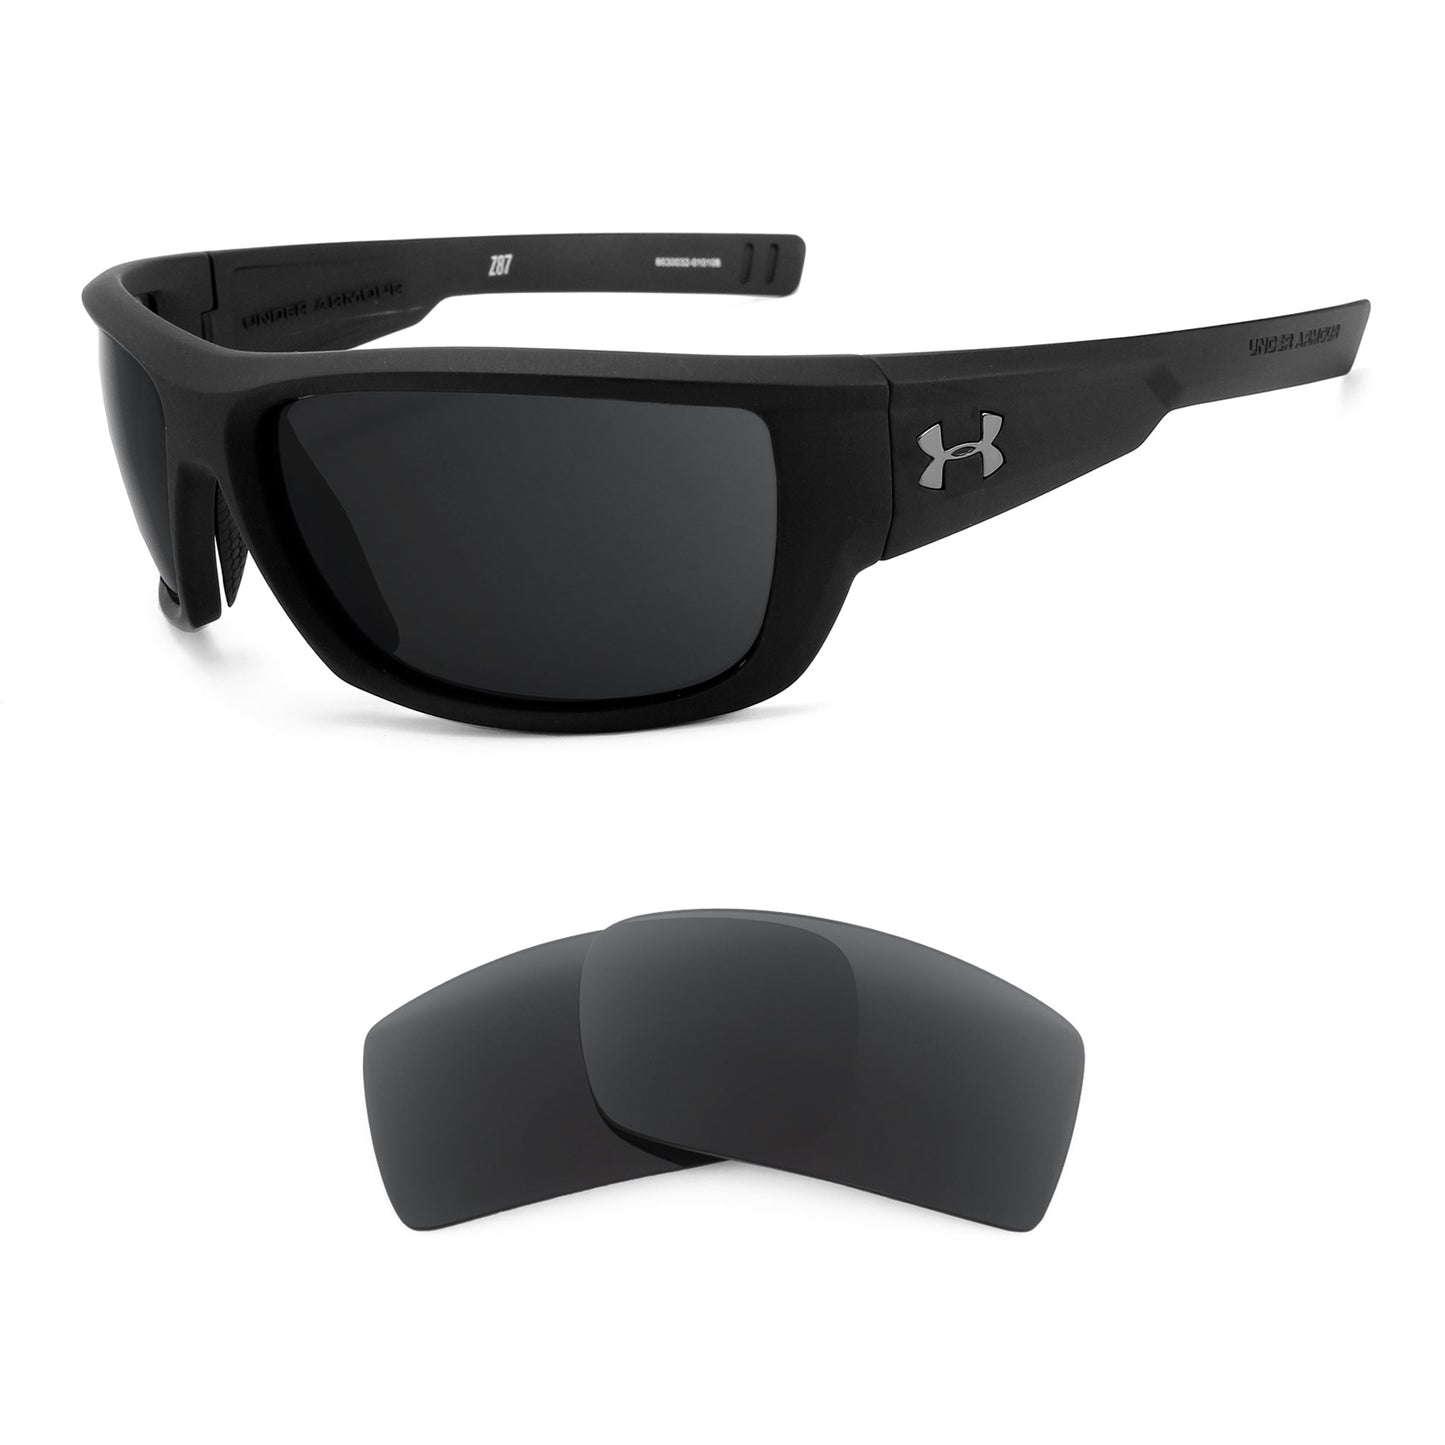 Under Armour Rumble sunglasses with replacement lenses